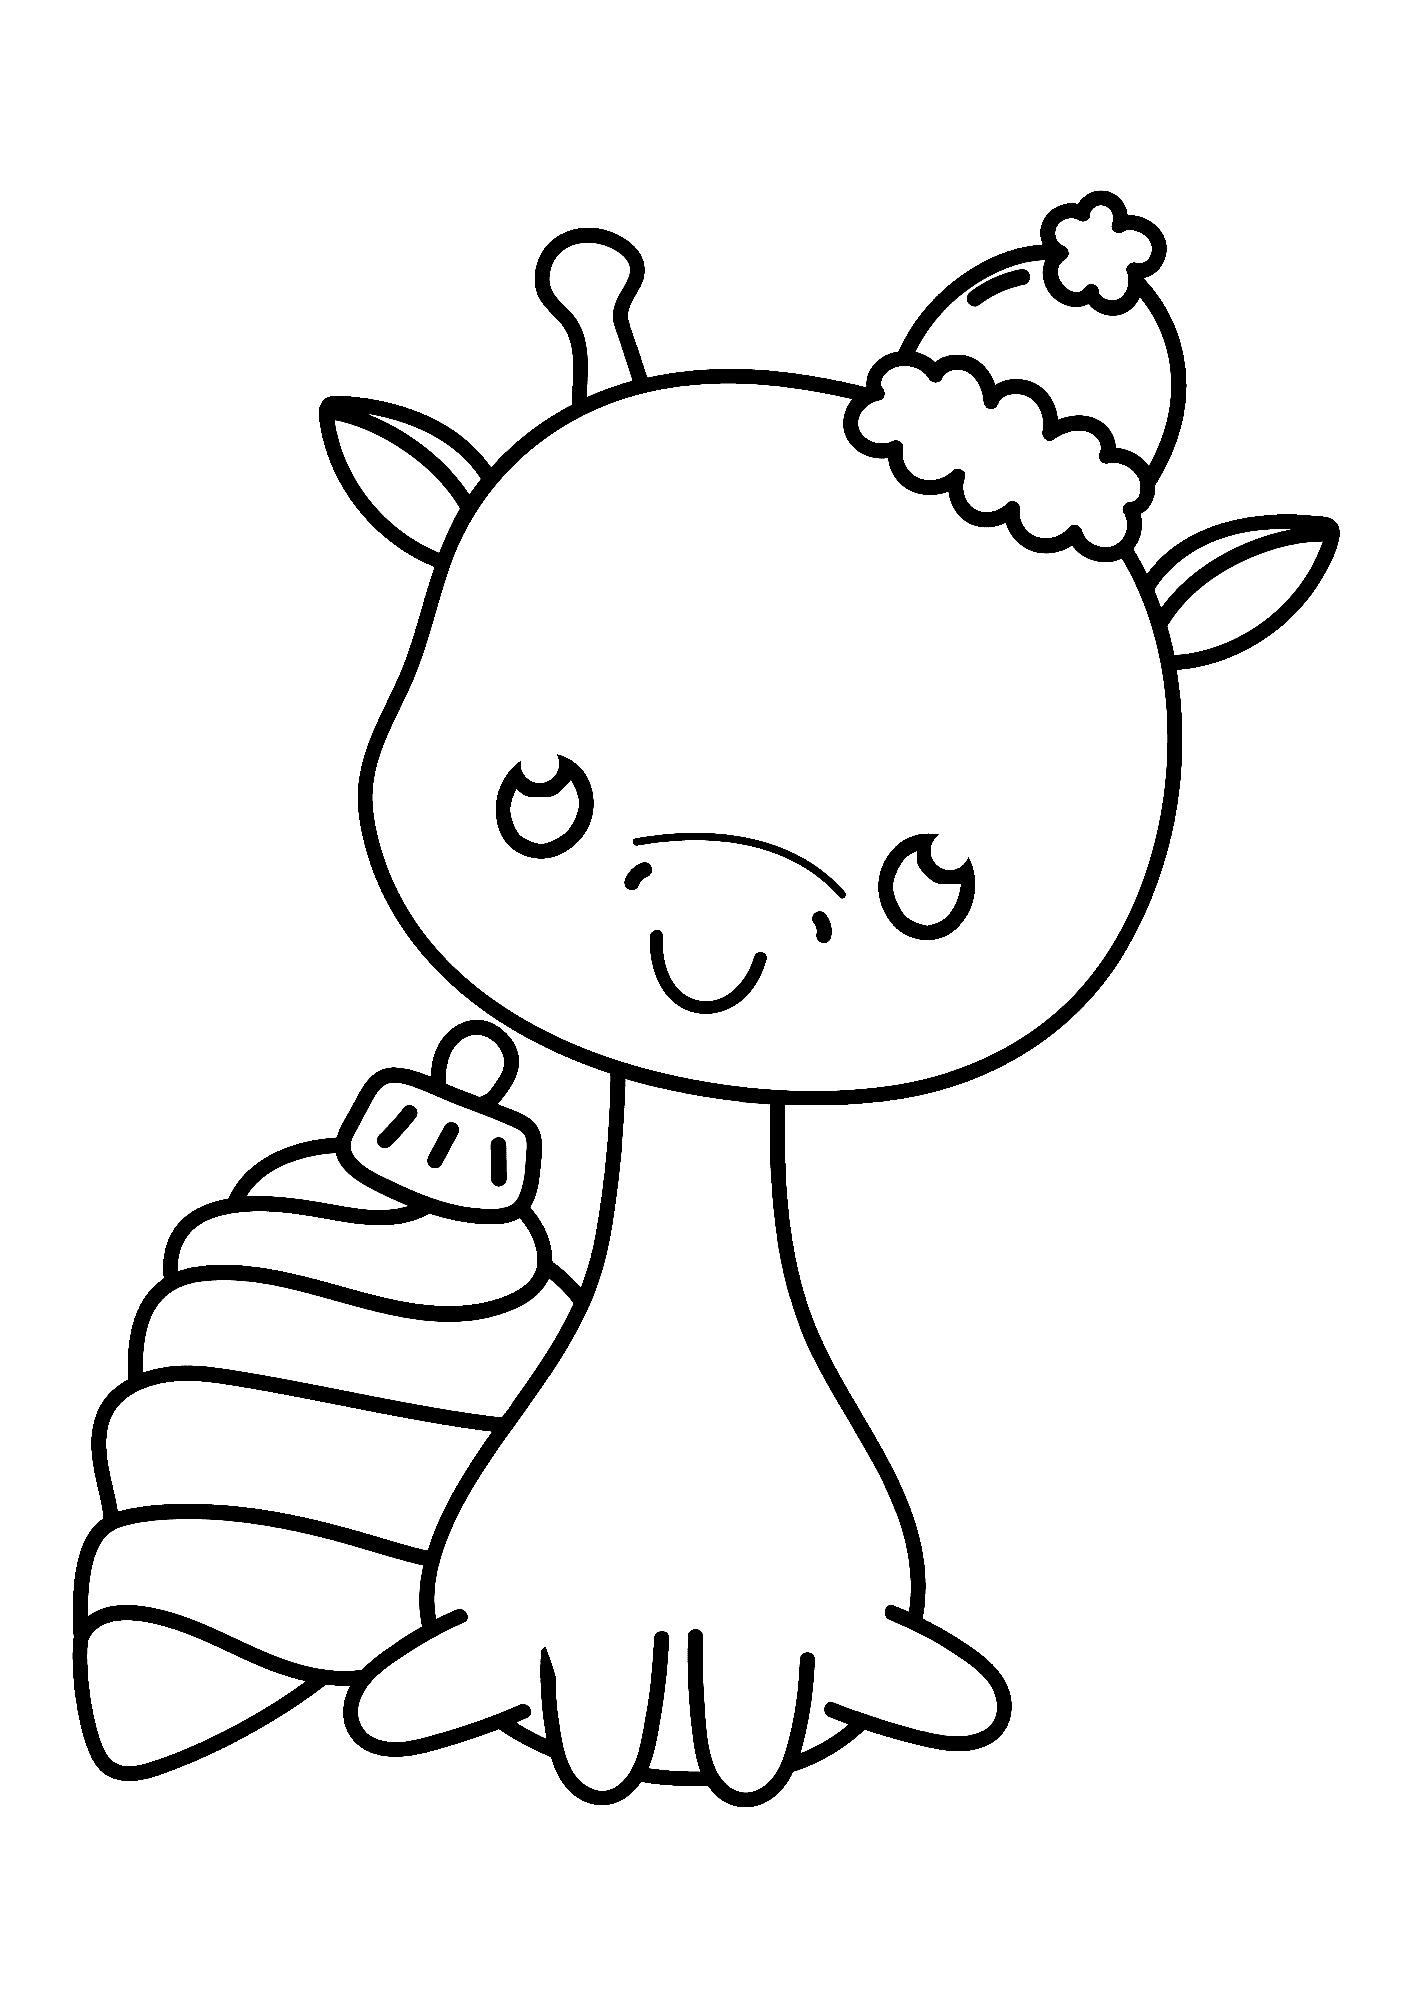 Image Of Giraffe Free Coloring Page